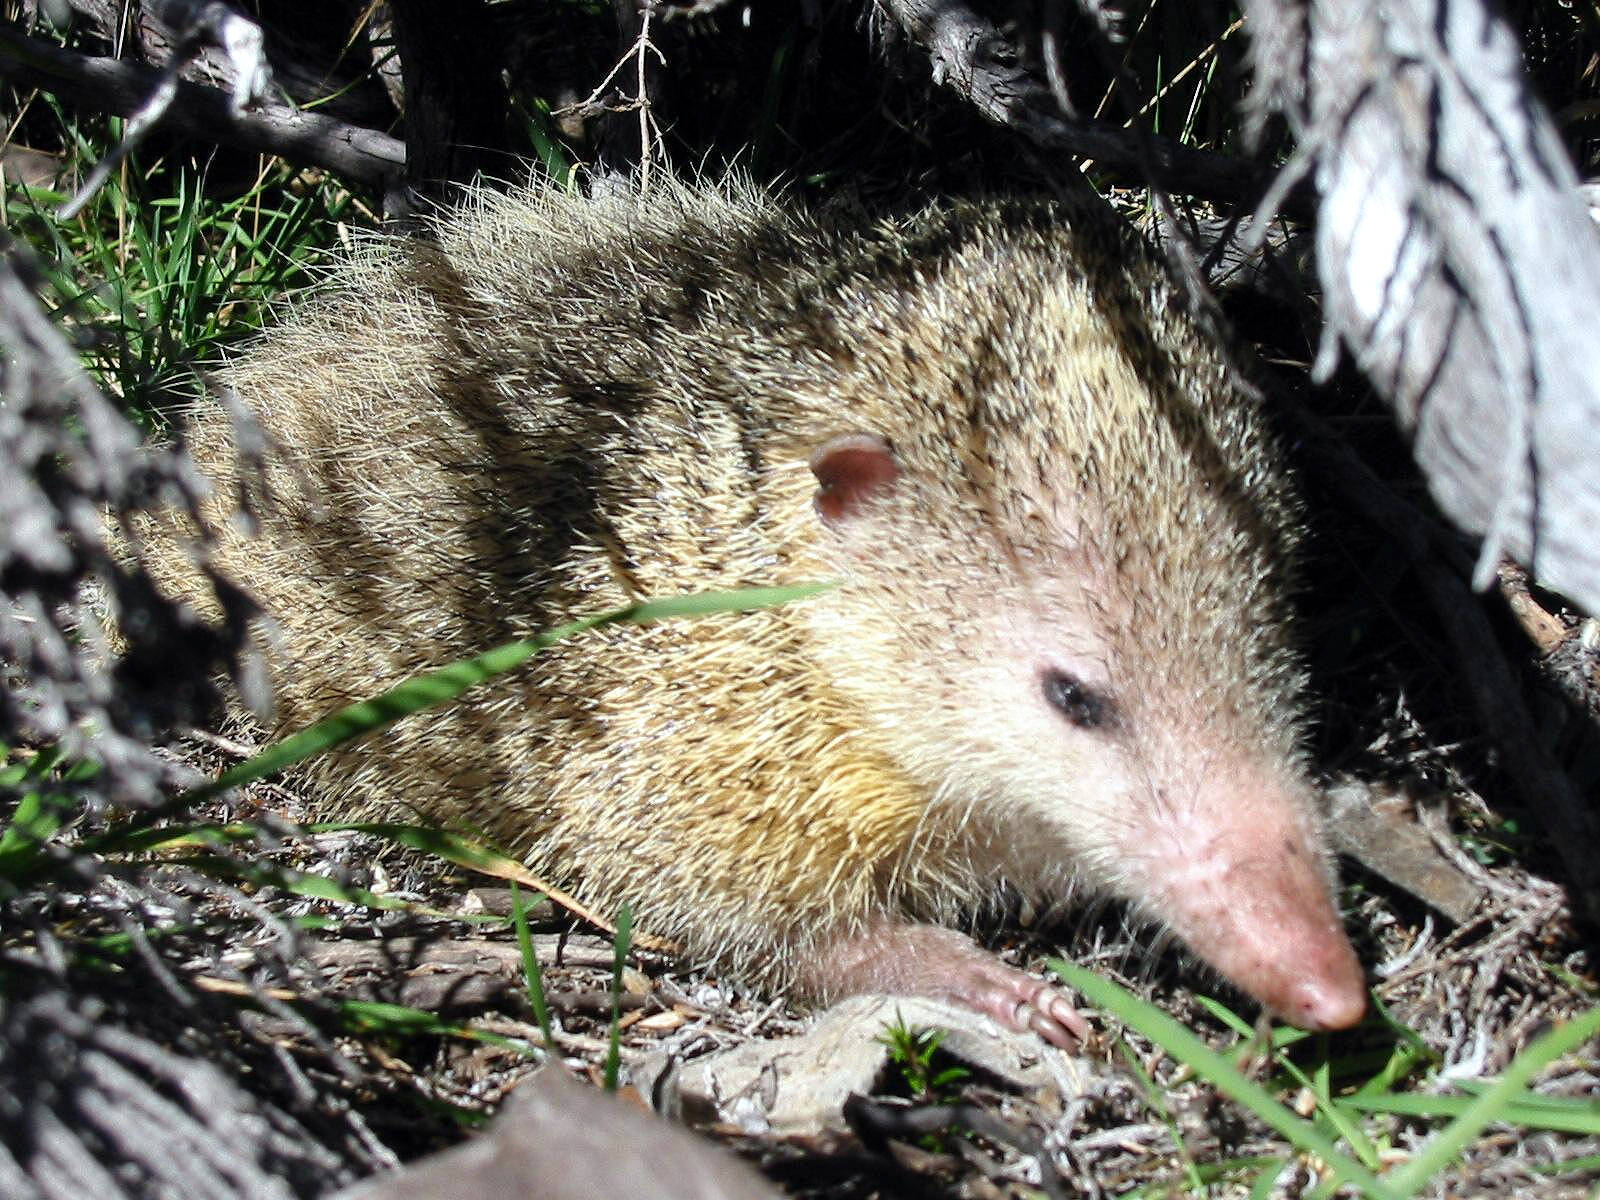 A tailless tenrec, one of many variations of the small spiny mammal. (Public domain photo via CC BY-SA 3.0)